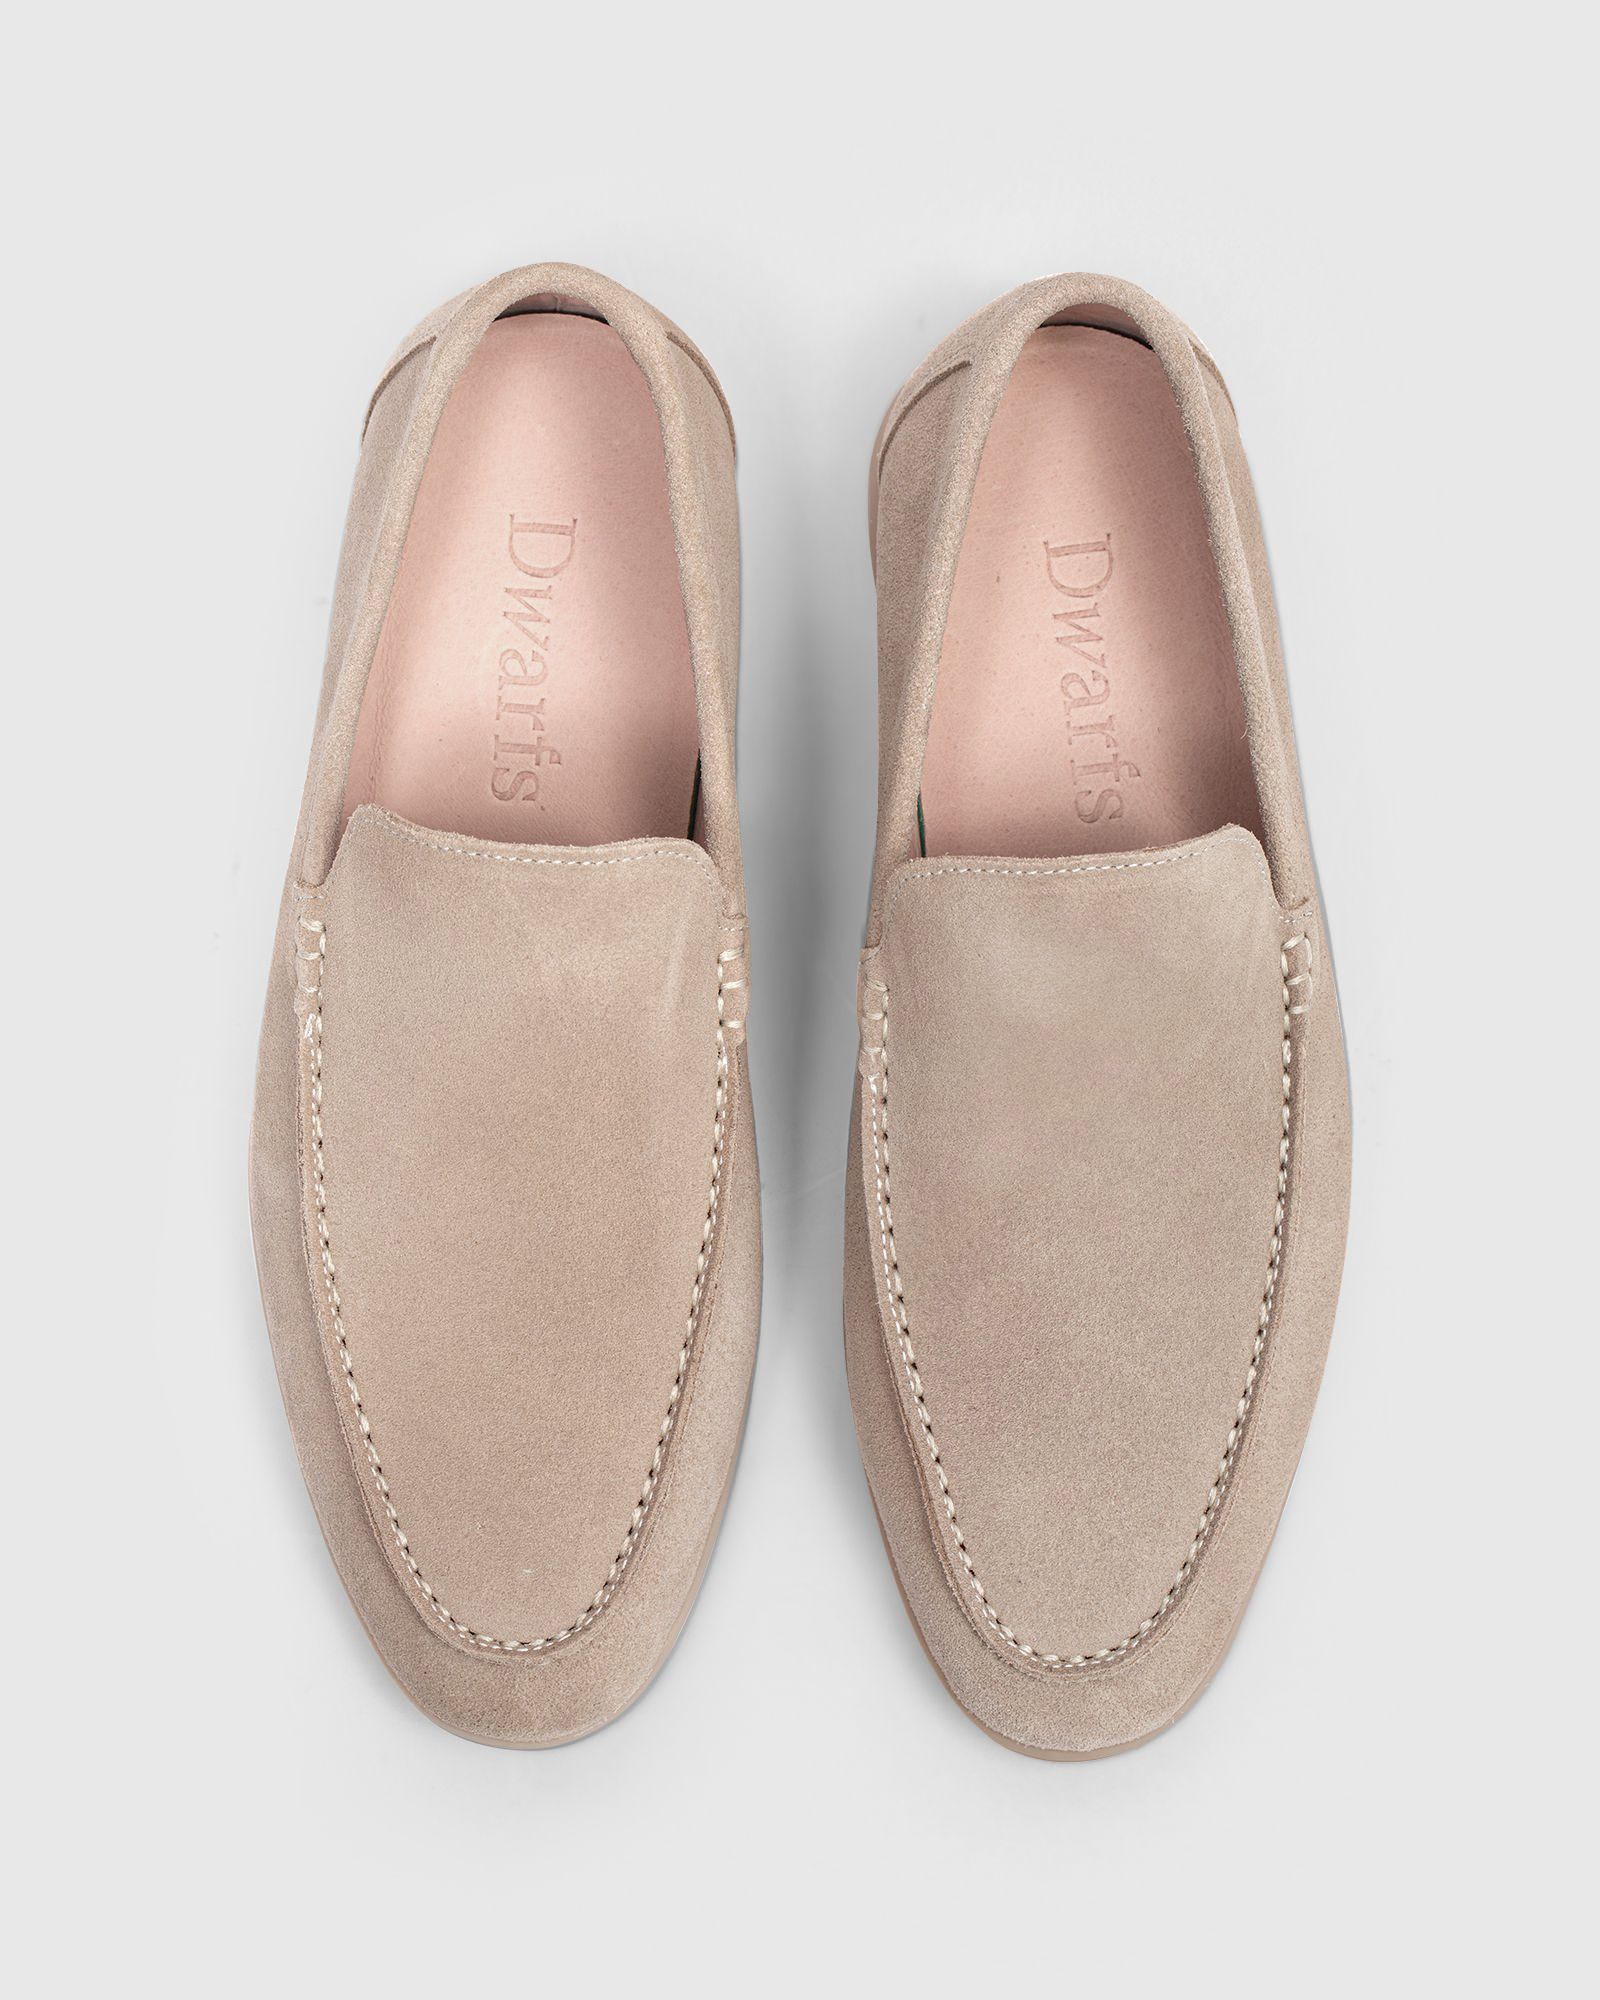  TAIL SUEDE LOAFER 